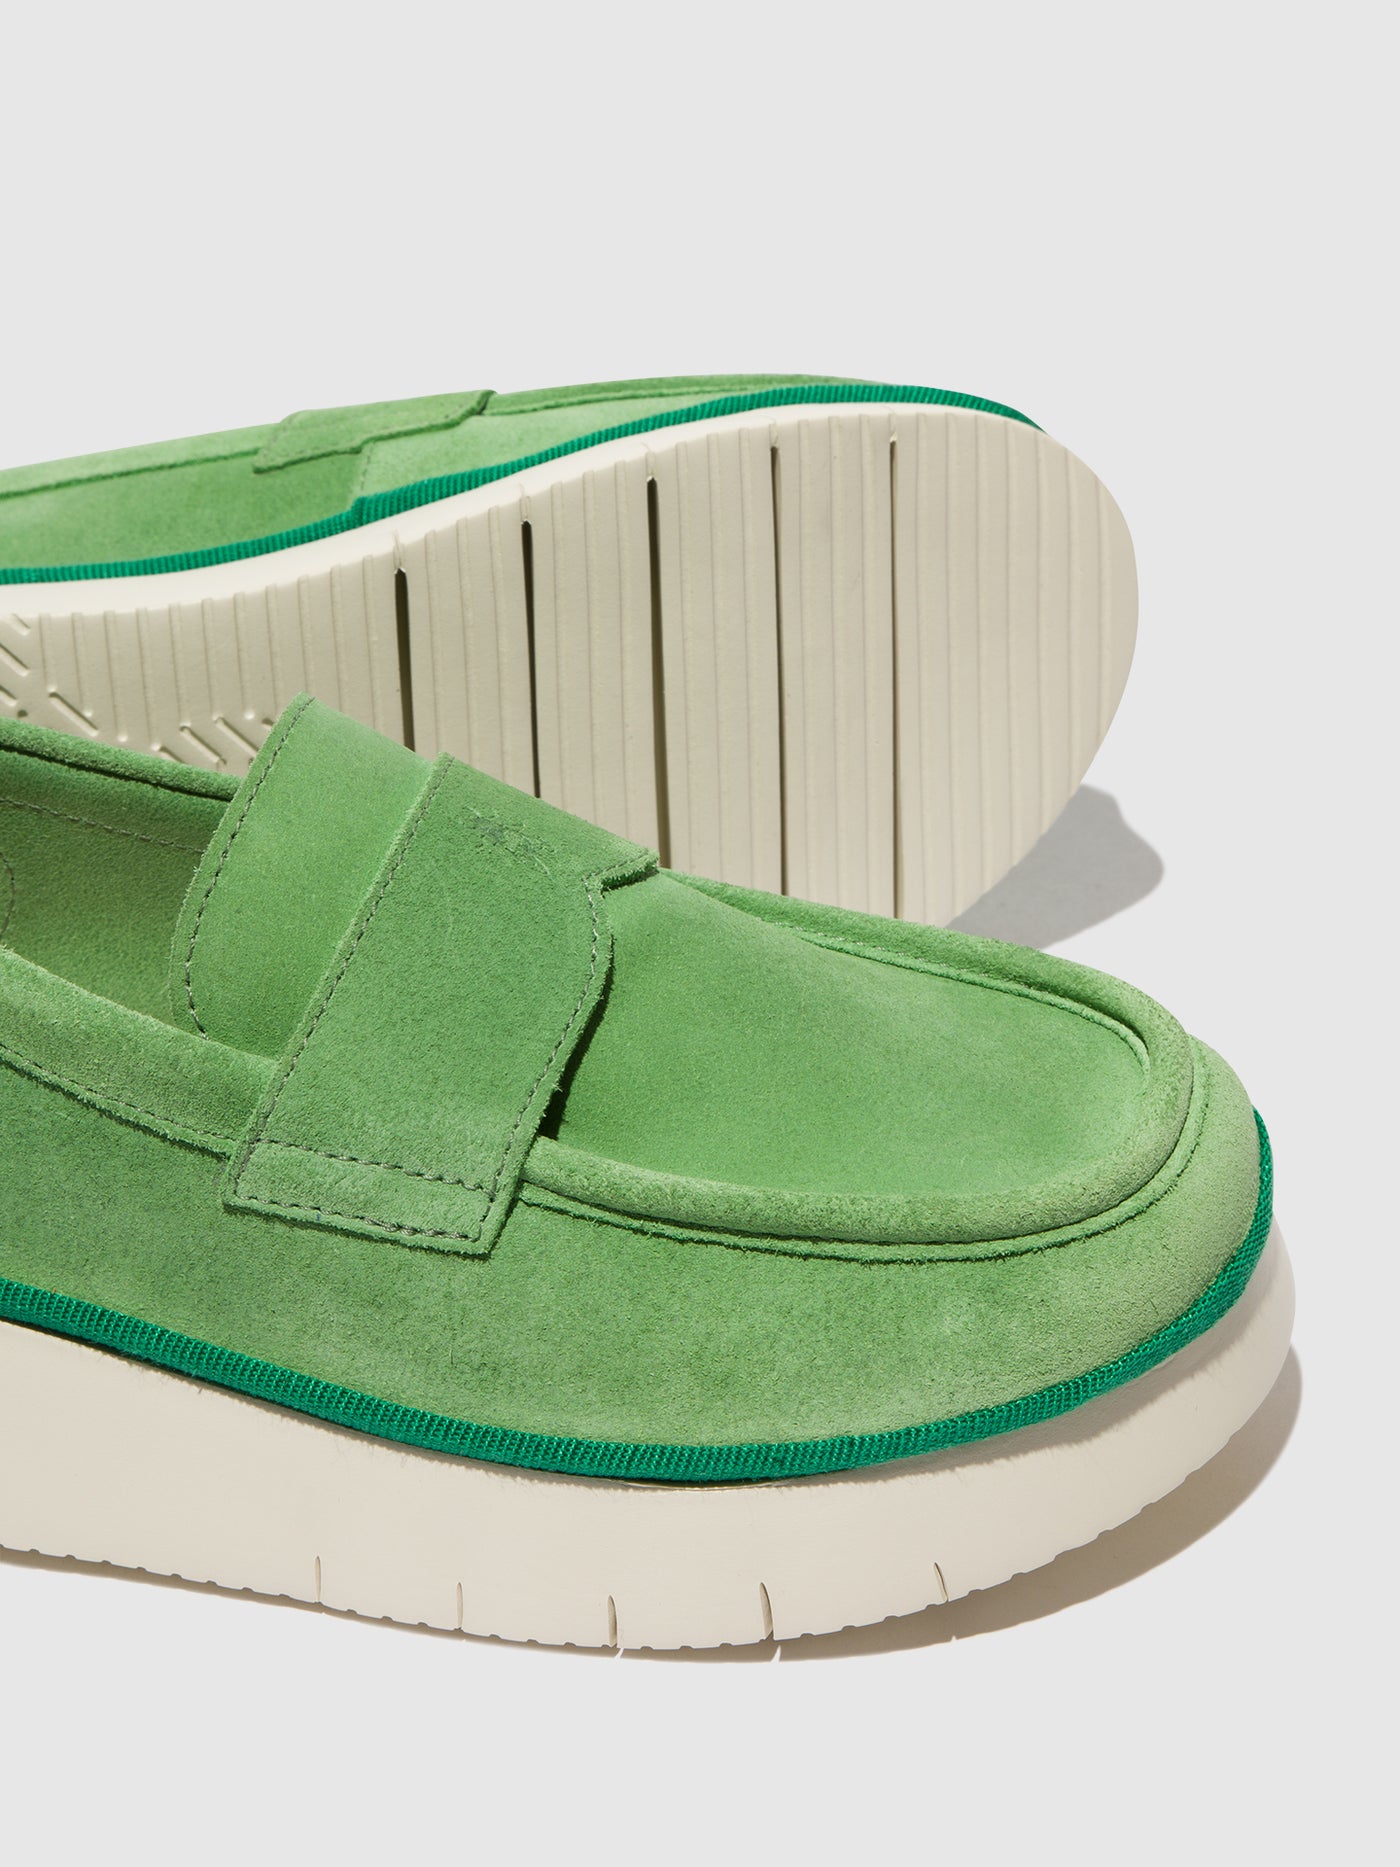 Slip-on Shoes COAF418FLY LIME GREEN